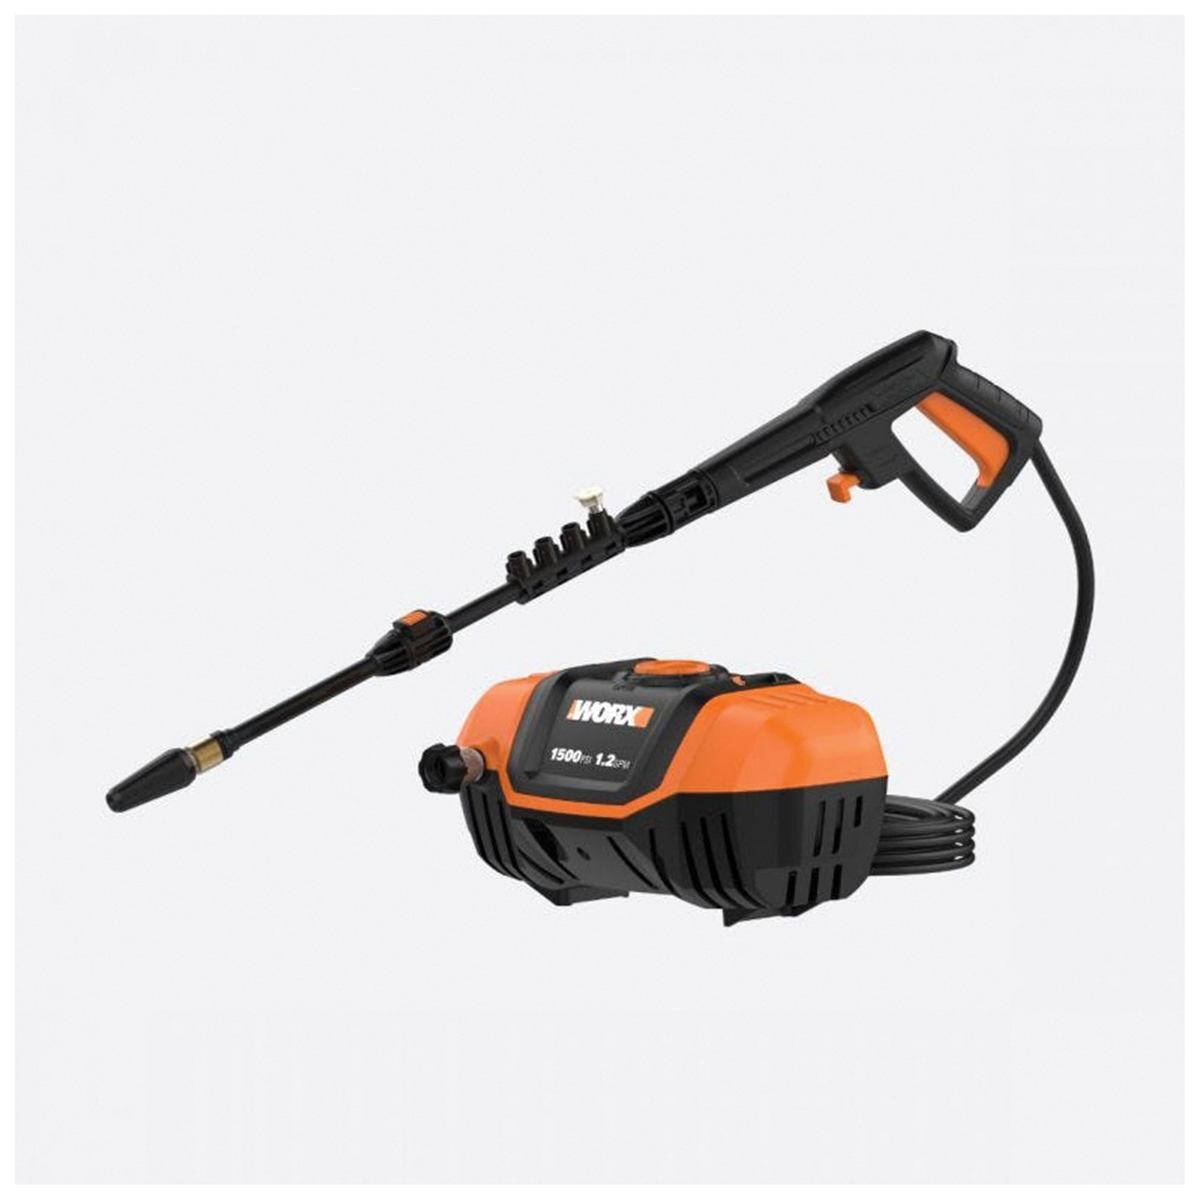 WORX WG601 Electric Pressure Washer, 13 A, 120 V, Axial Cam Pump, 1500 to 2000 psi Operating, 1.2 to 1.85 gpm